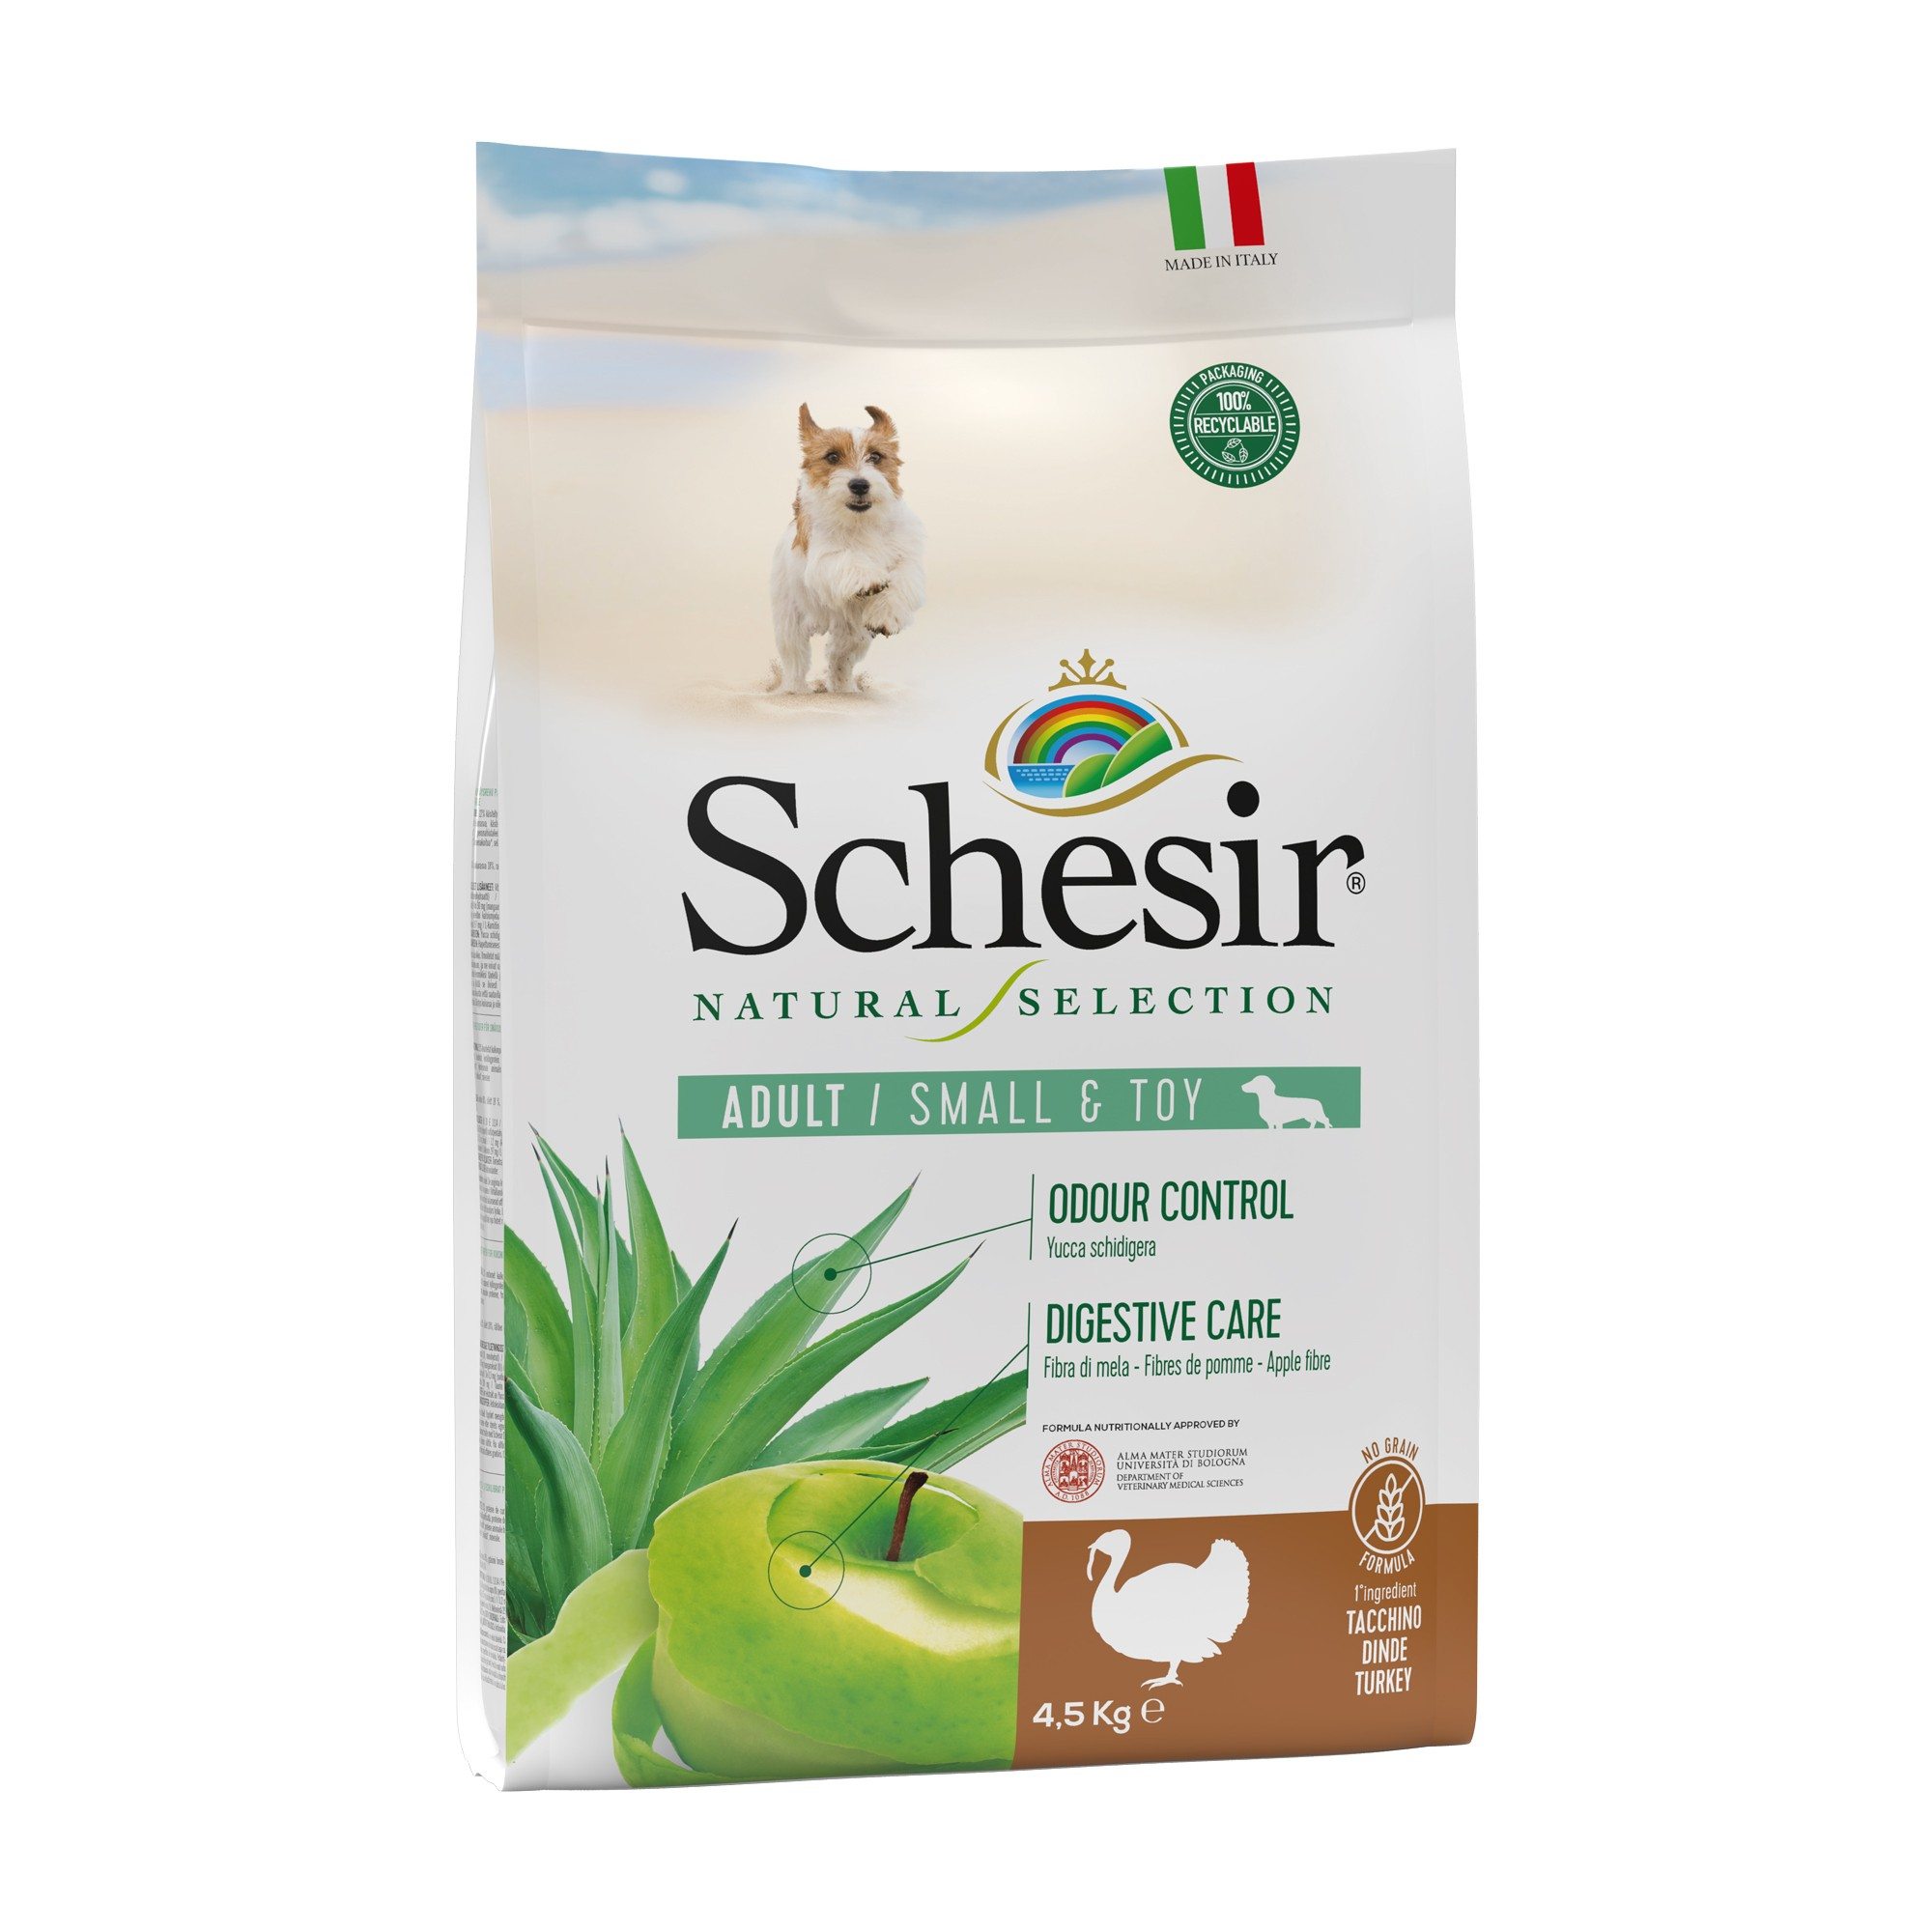 Schesir Natural Selection Adult Small Dog